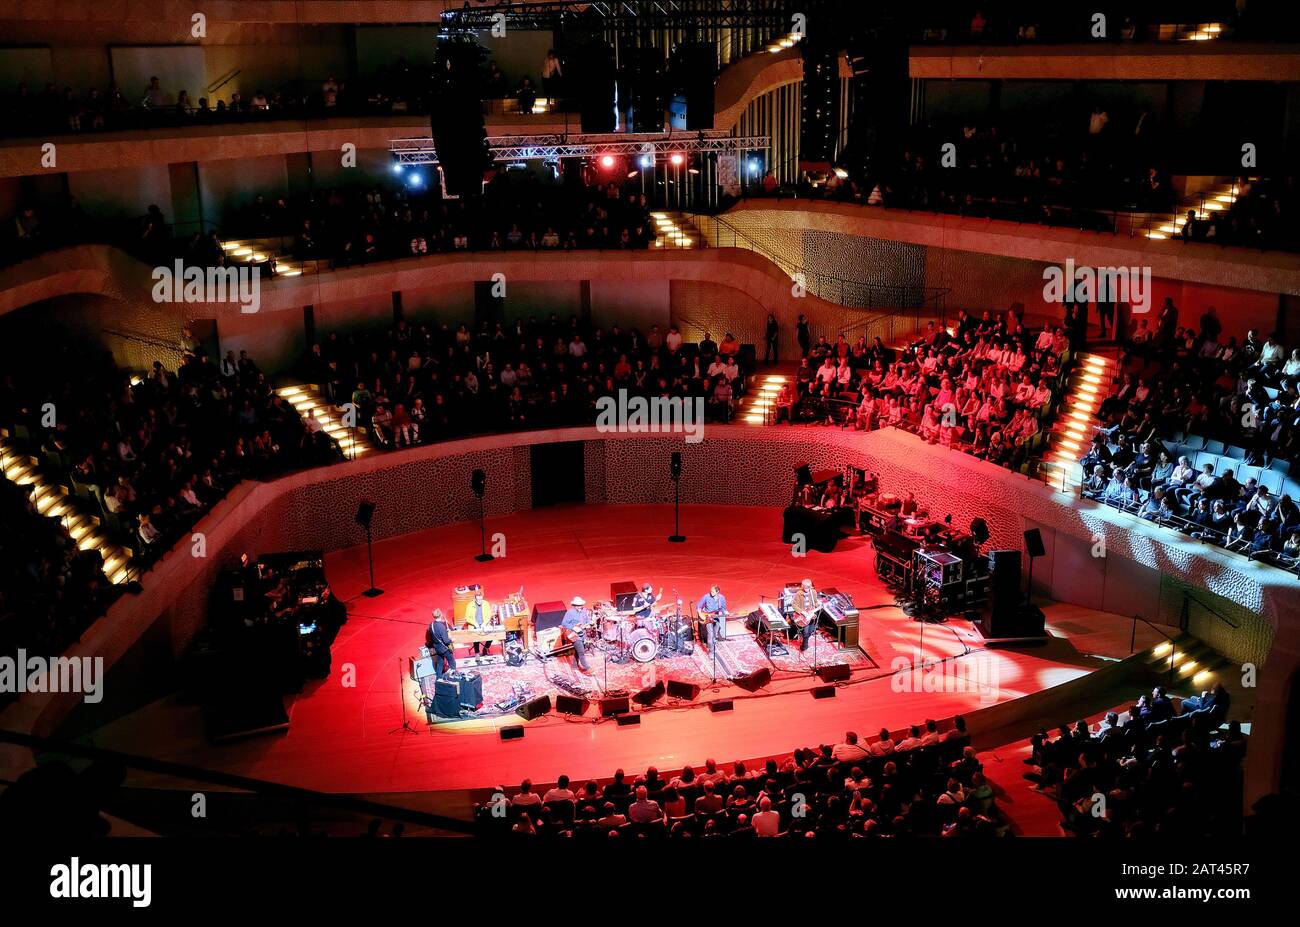 Concert of the american band Wilco in the Great Hall of the Konzerthaus Elbphilharmonie in the Hamburg Harbour, Hamburg, Germany Stock Photo